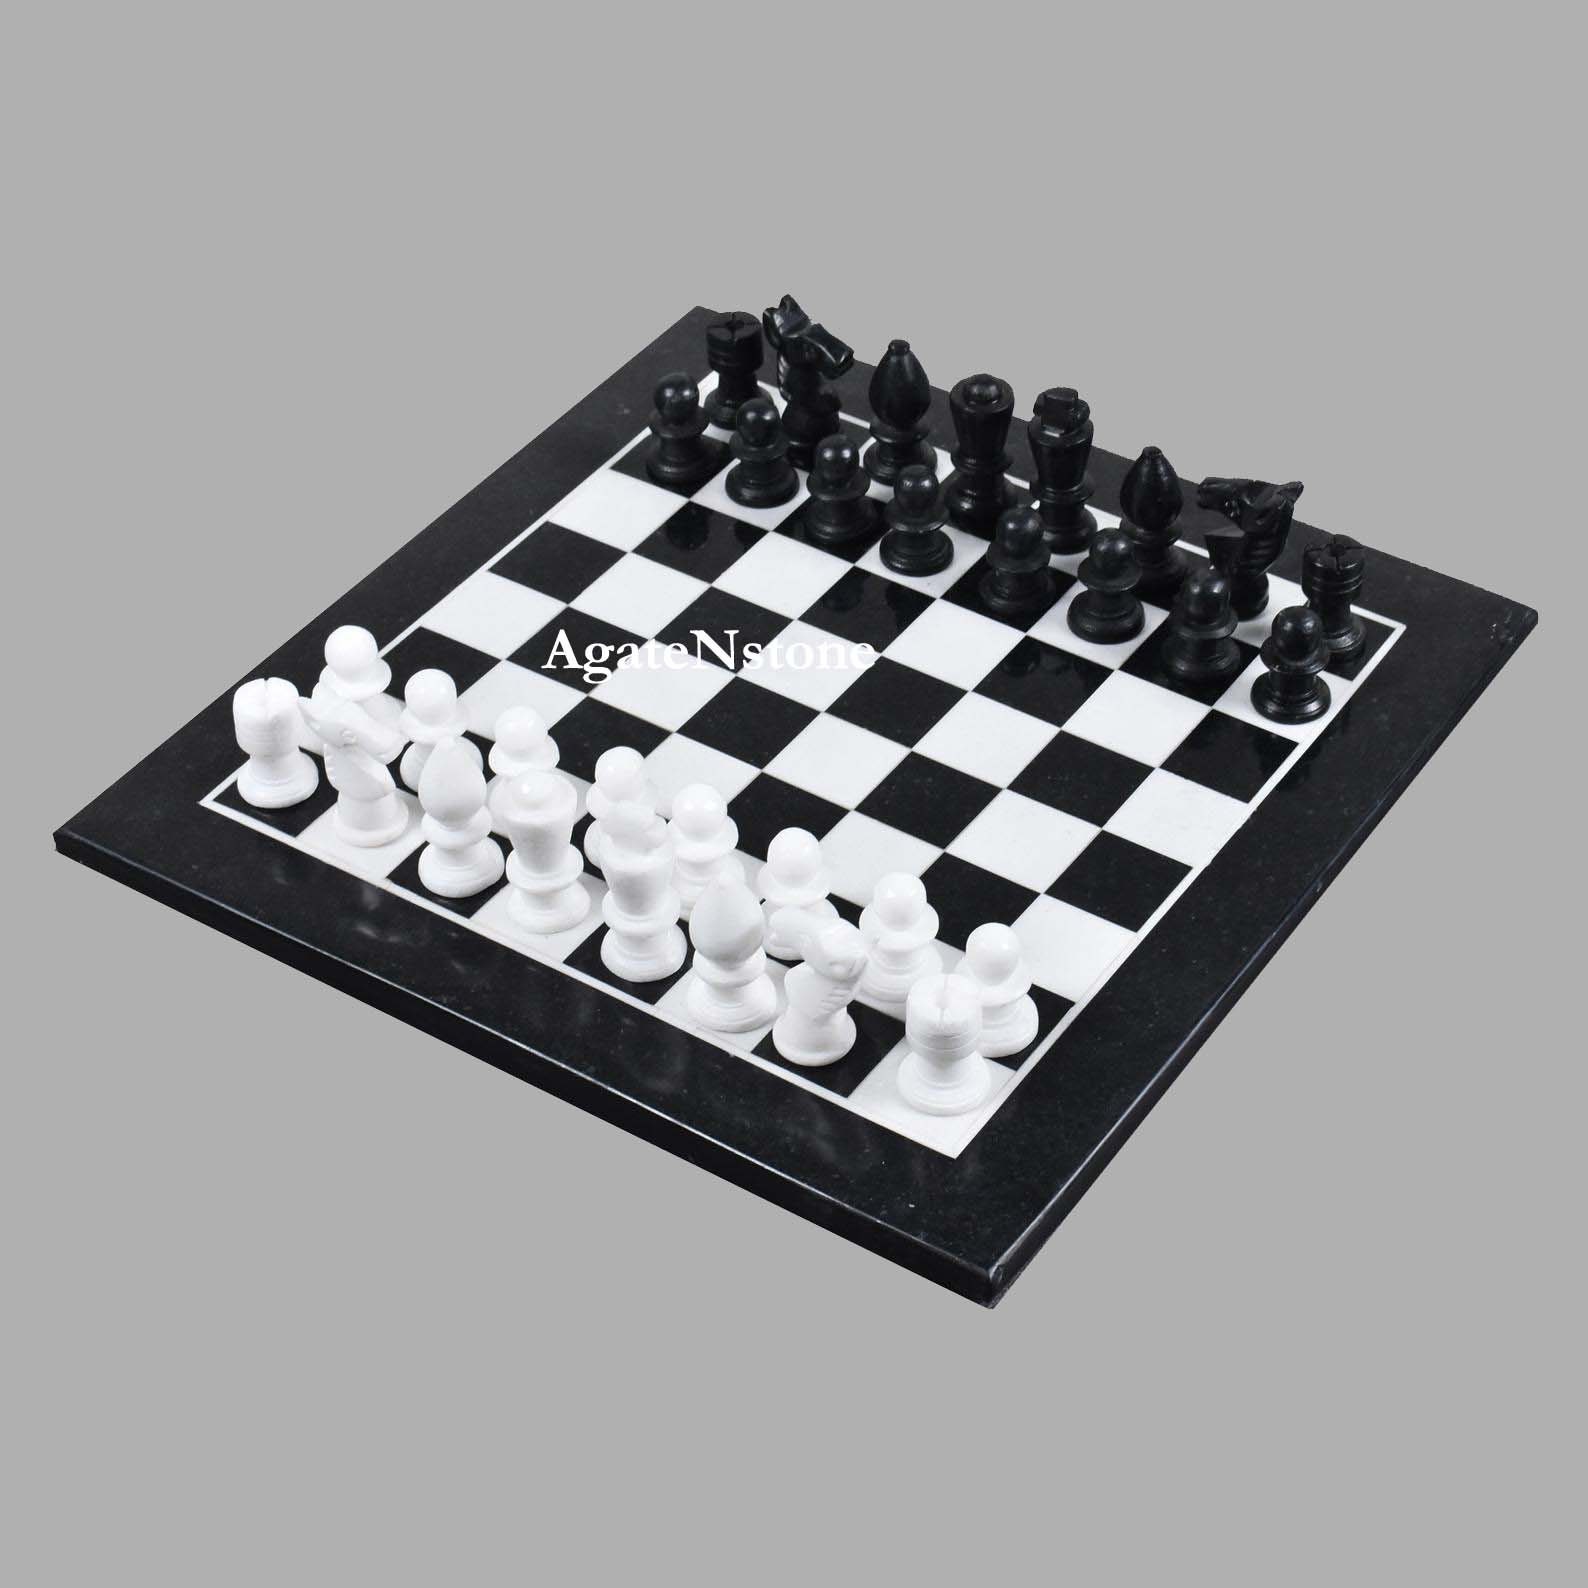 Black and White High-Quality Marble Chess Set